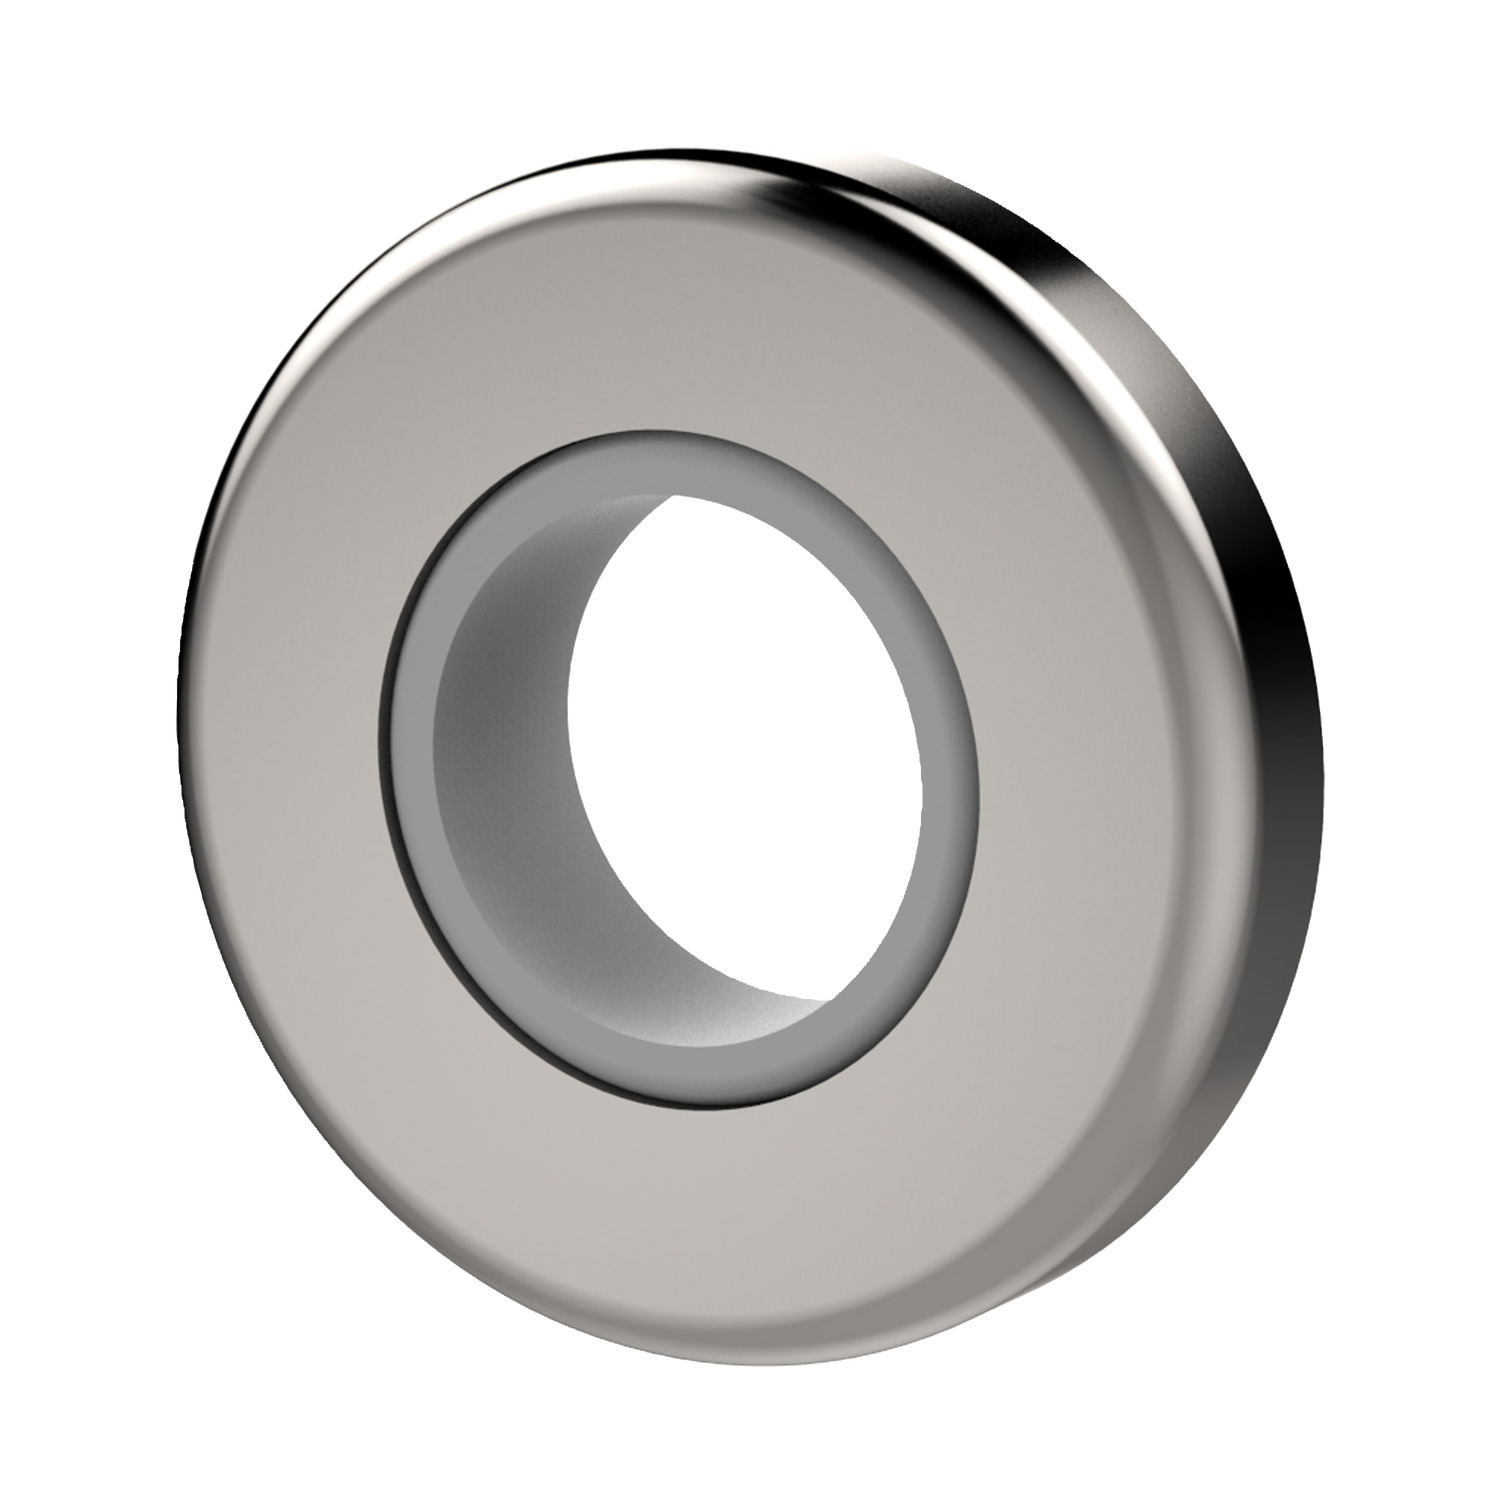 36637.W0030 Pressure-rated sealing washer - M 3x3,0 A2 stainless steel